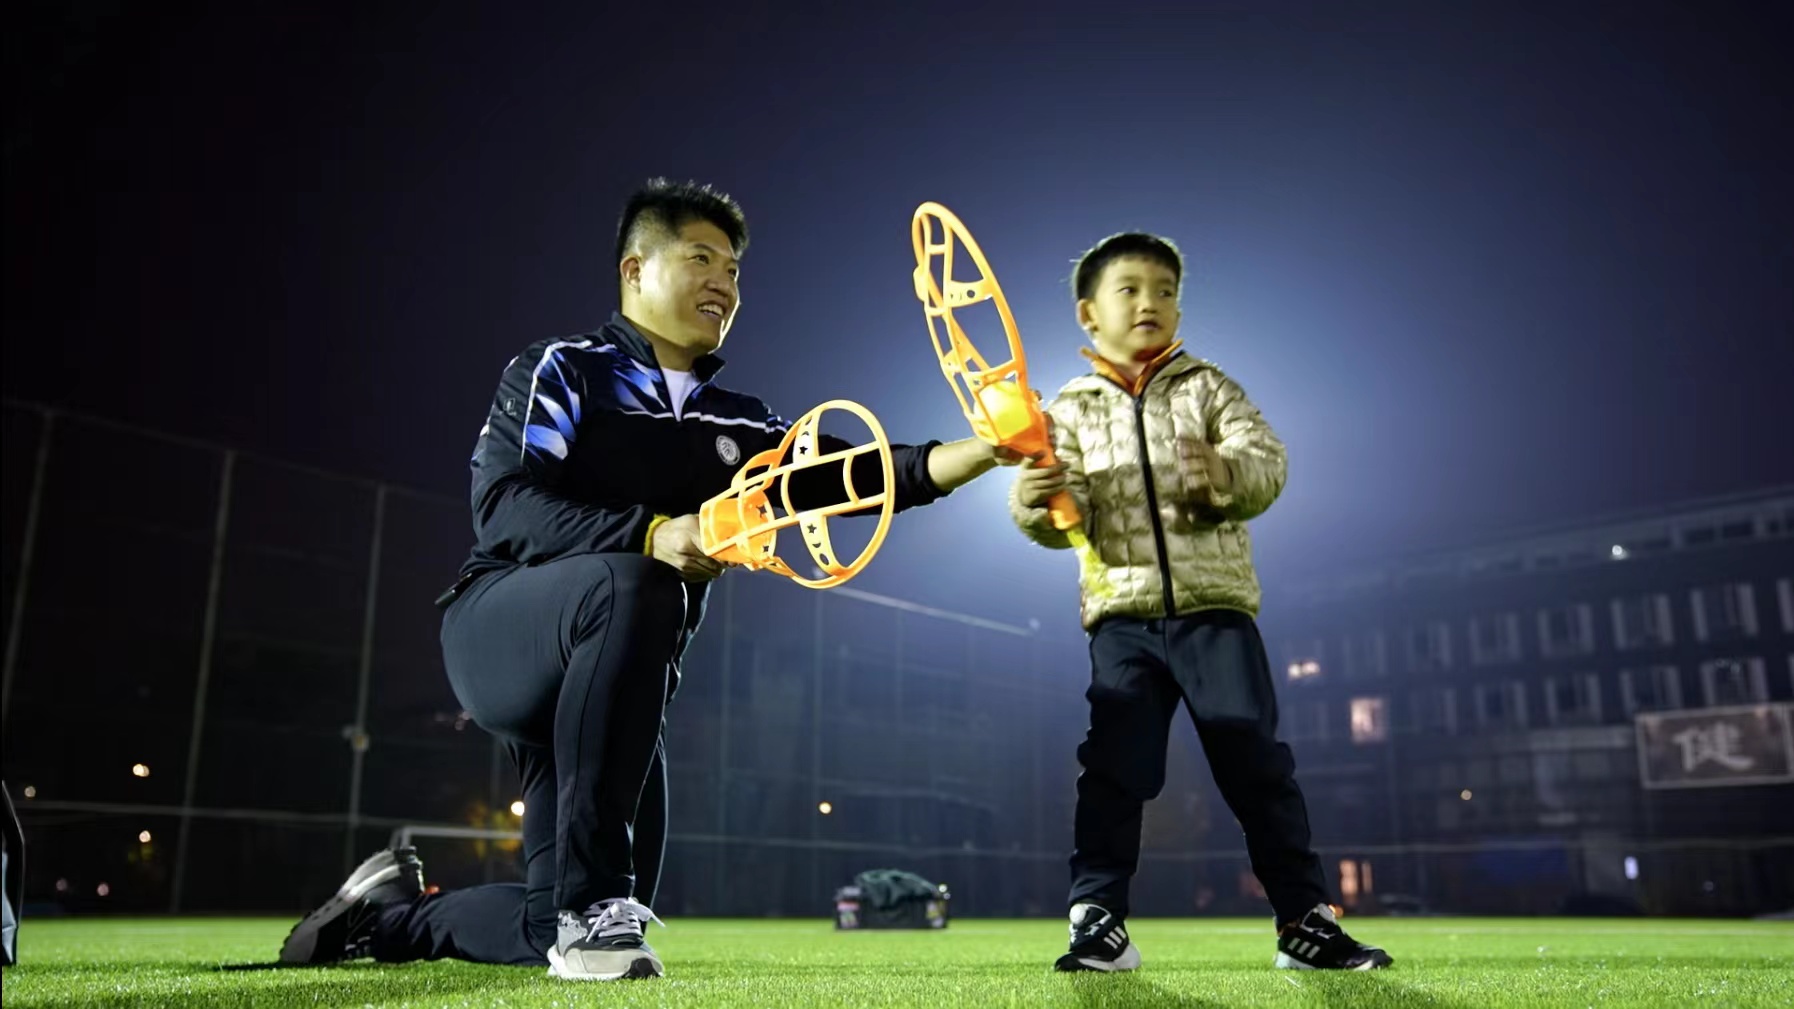 Chen Wencheng teaches a boy how to play skyball at a group tasting class on a playground at Peking University in Beijing, China, November 9, 2022. /CGTN